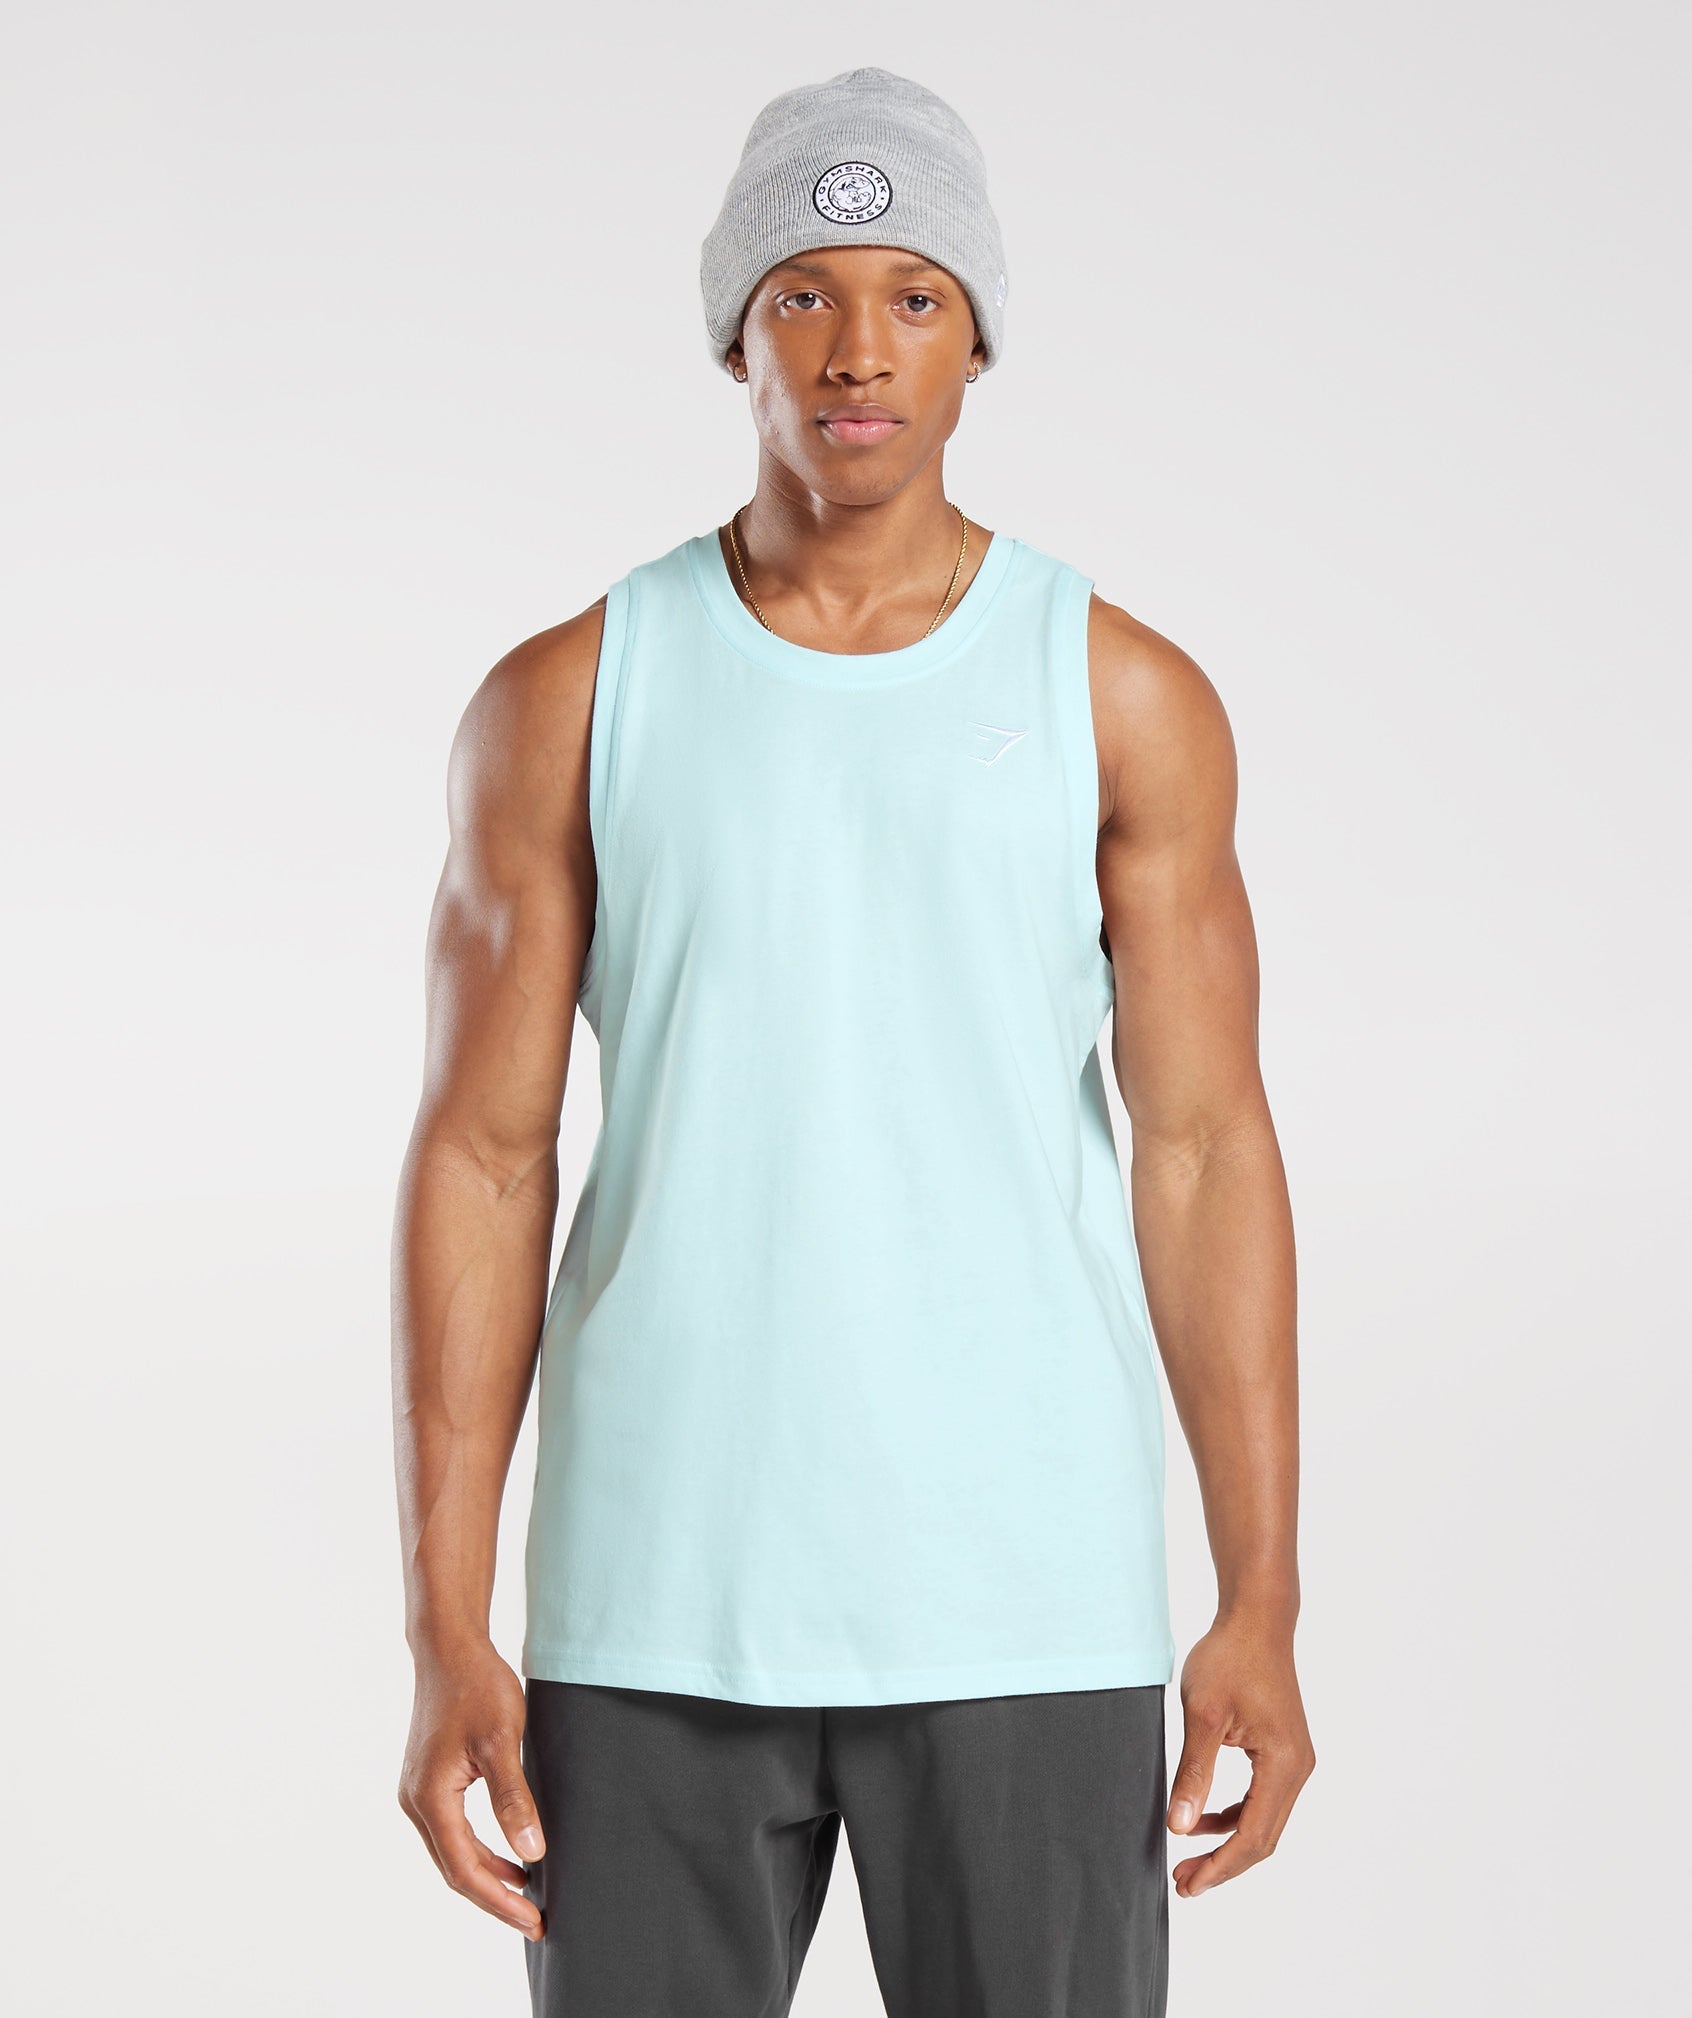 Crest Tank in Icy Blue - view 1